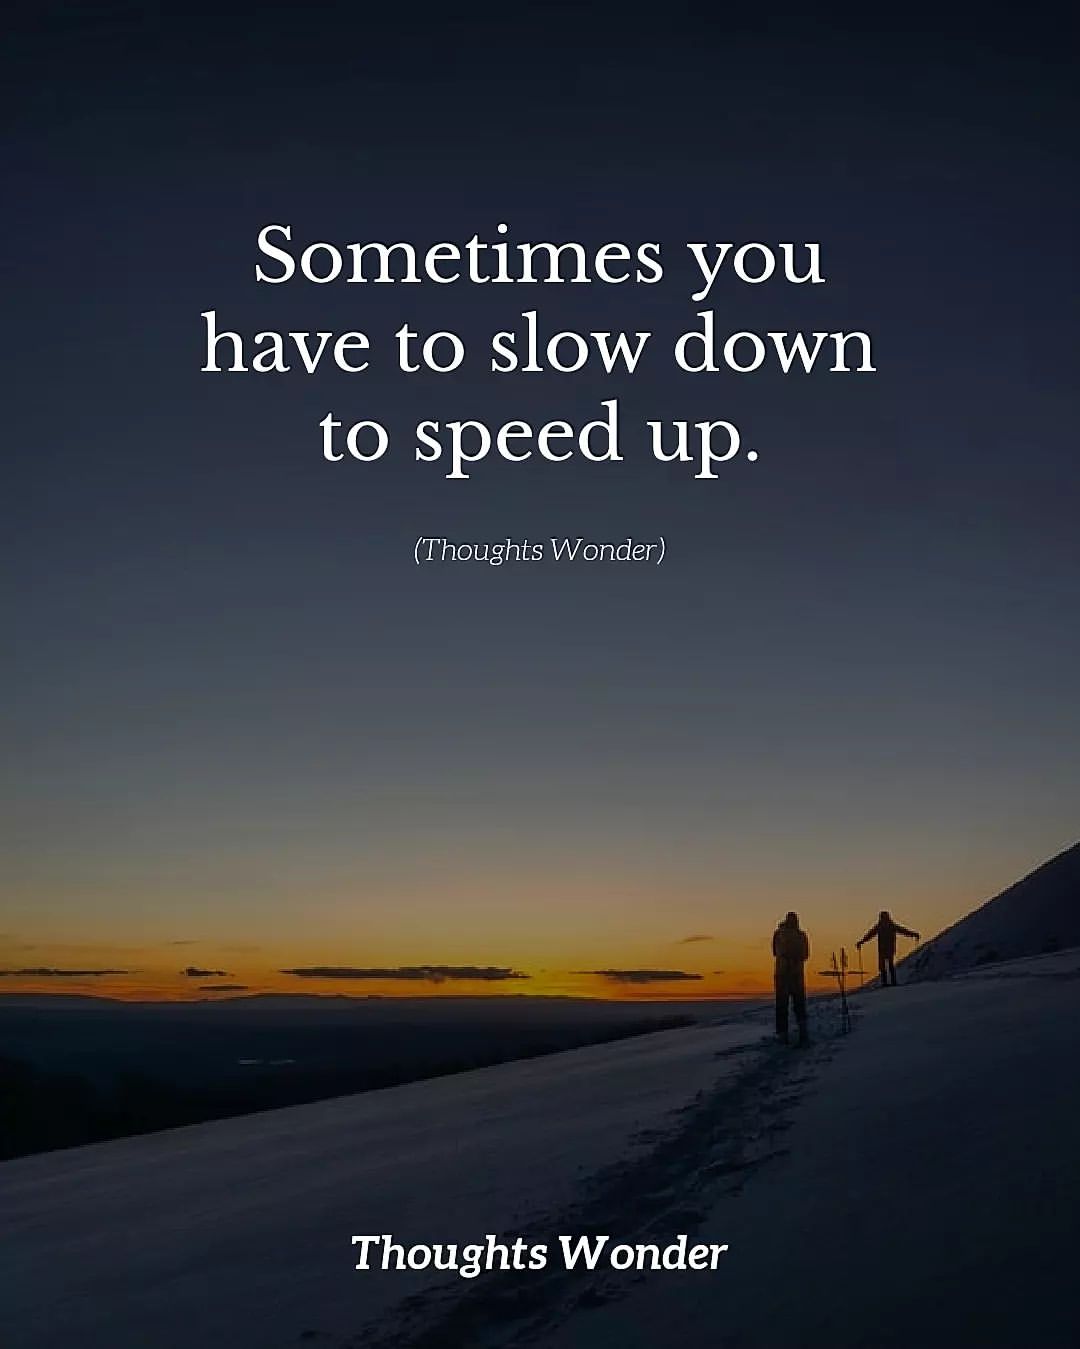 Sometimes you have to slow down to speed up.